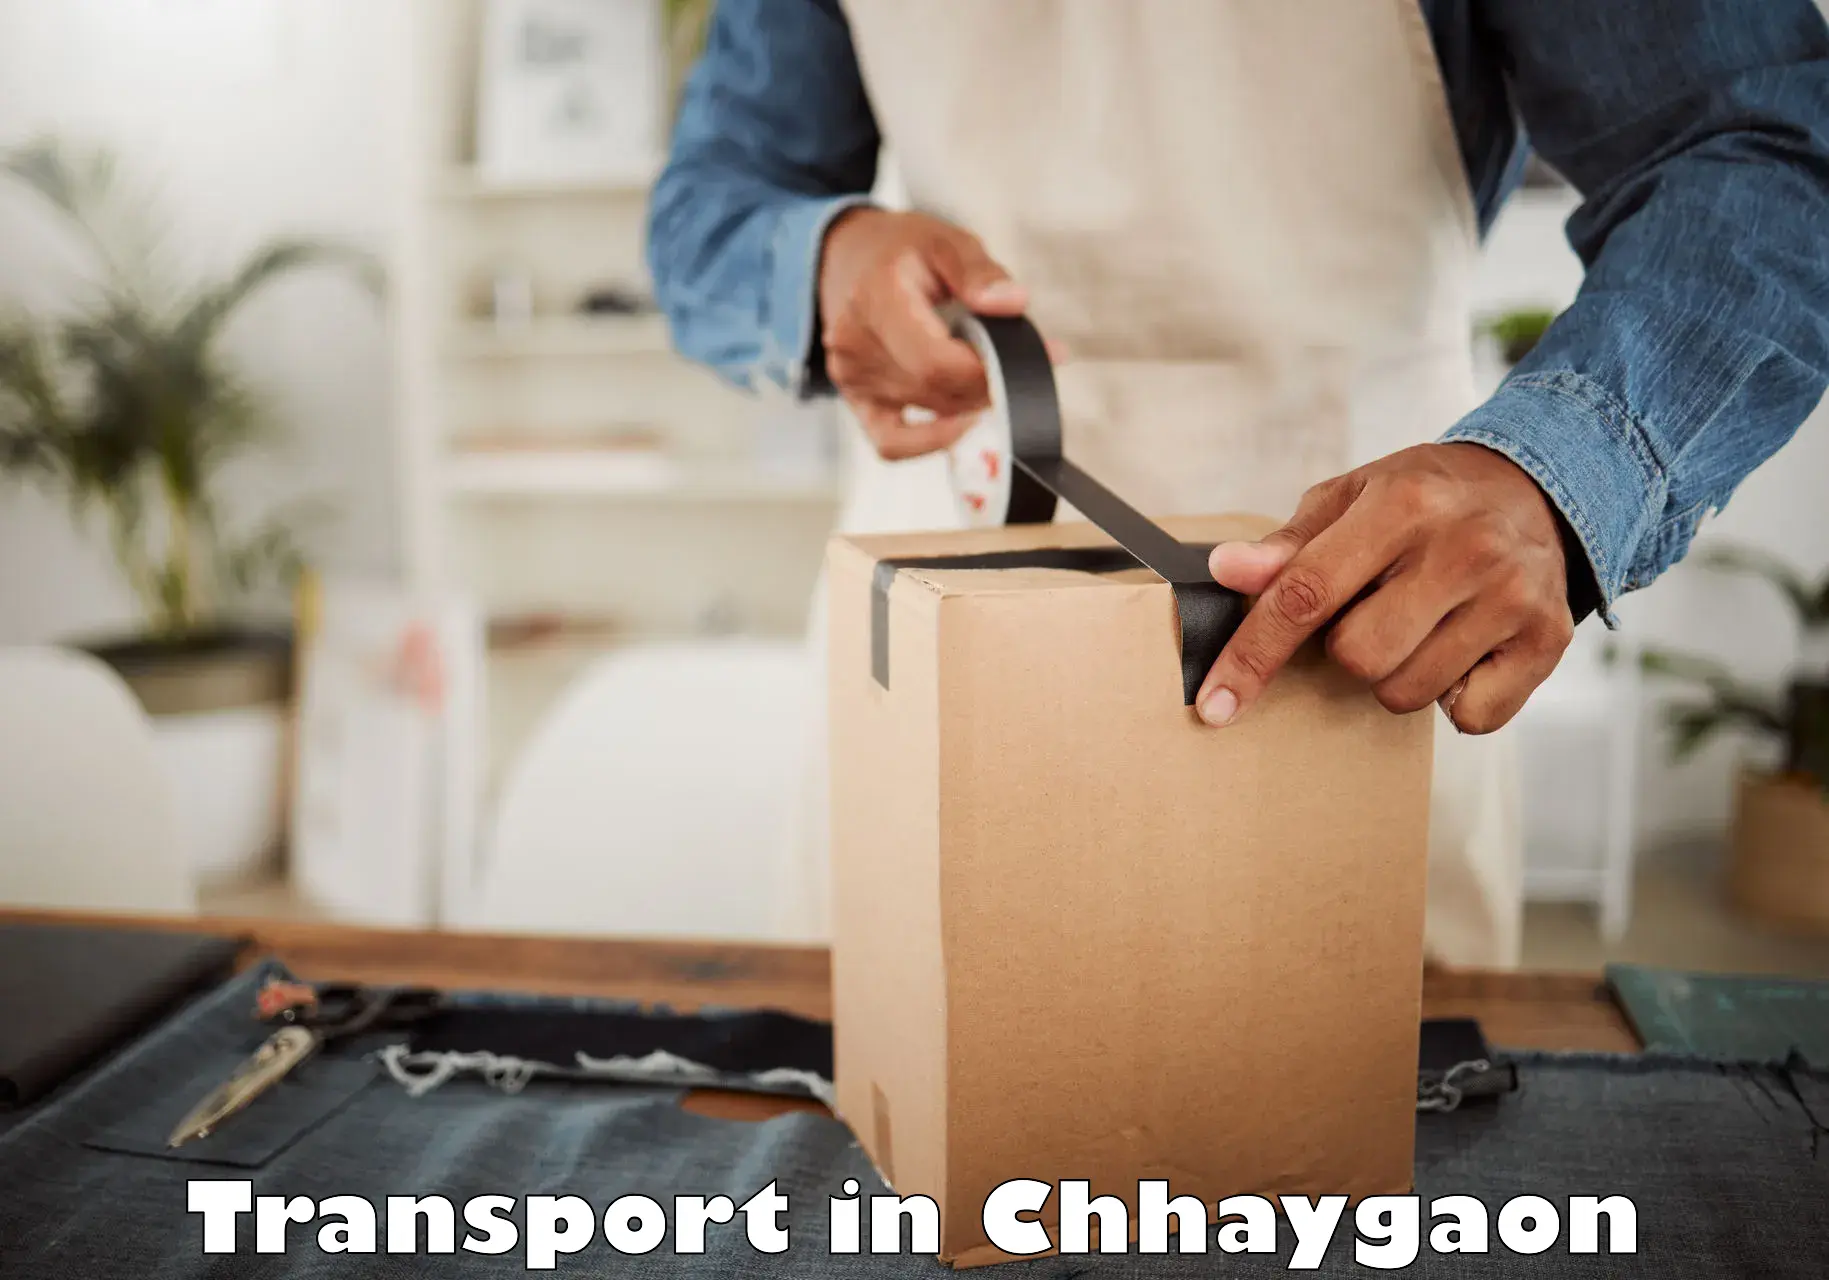 Transport services in Chhaygaon